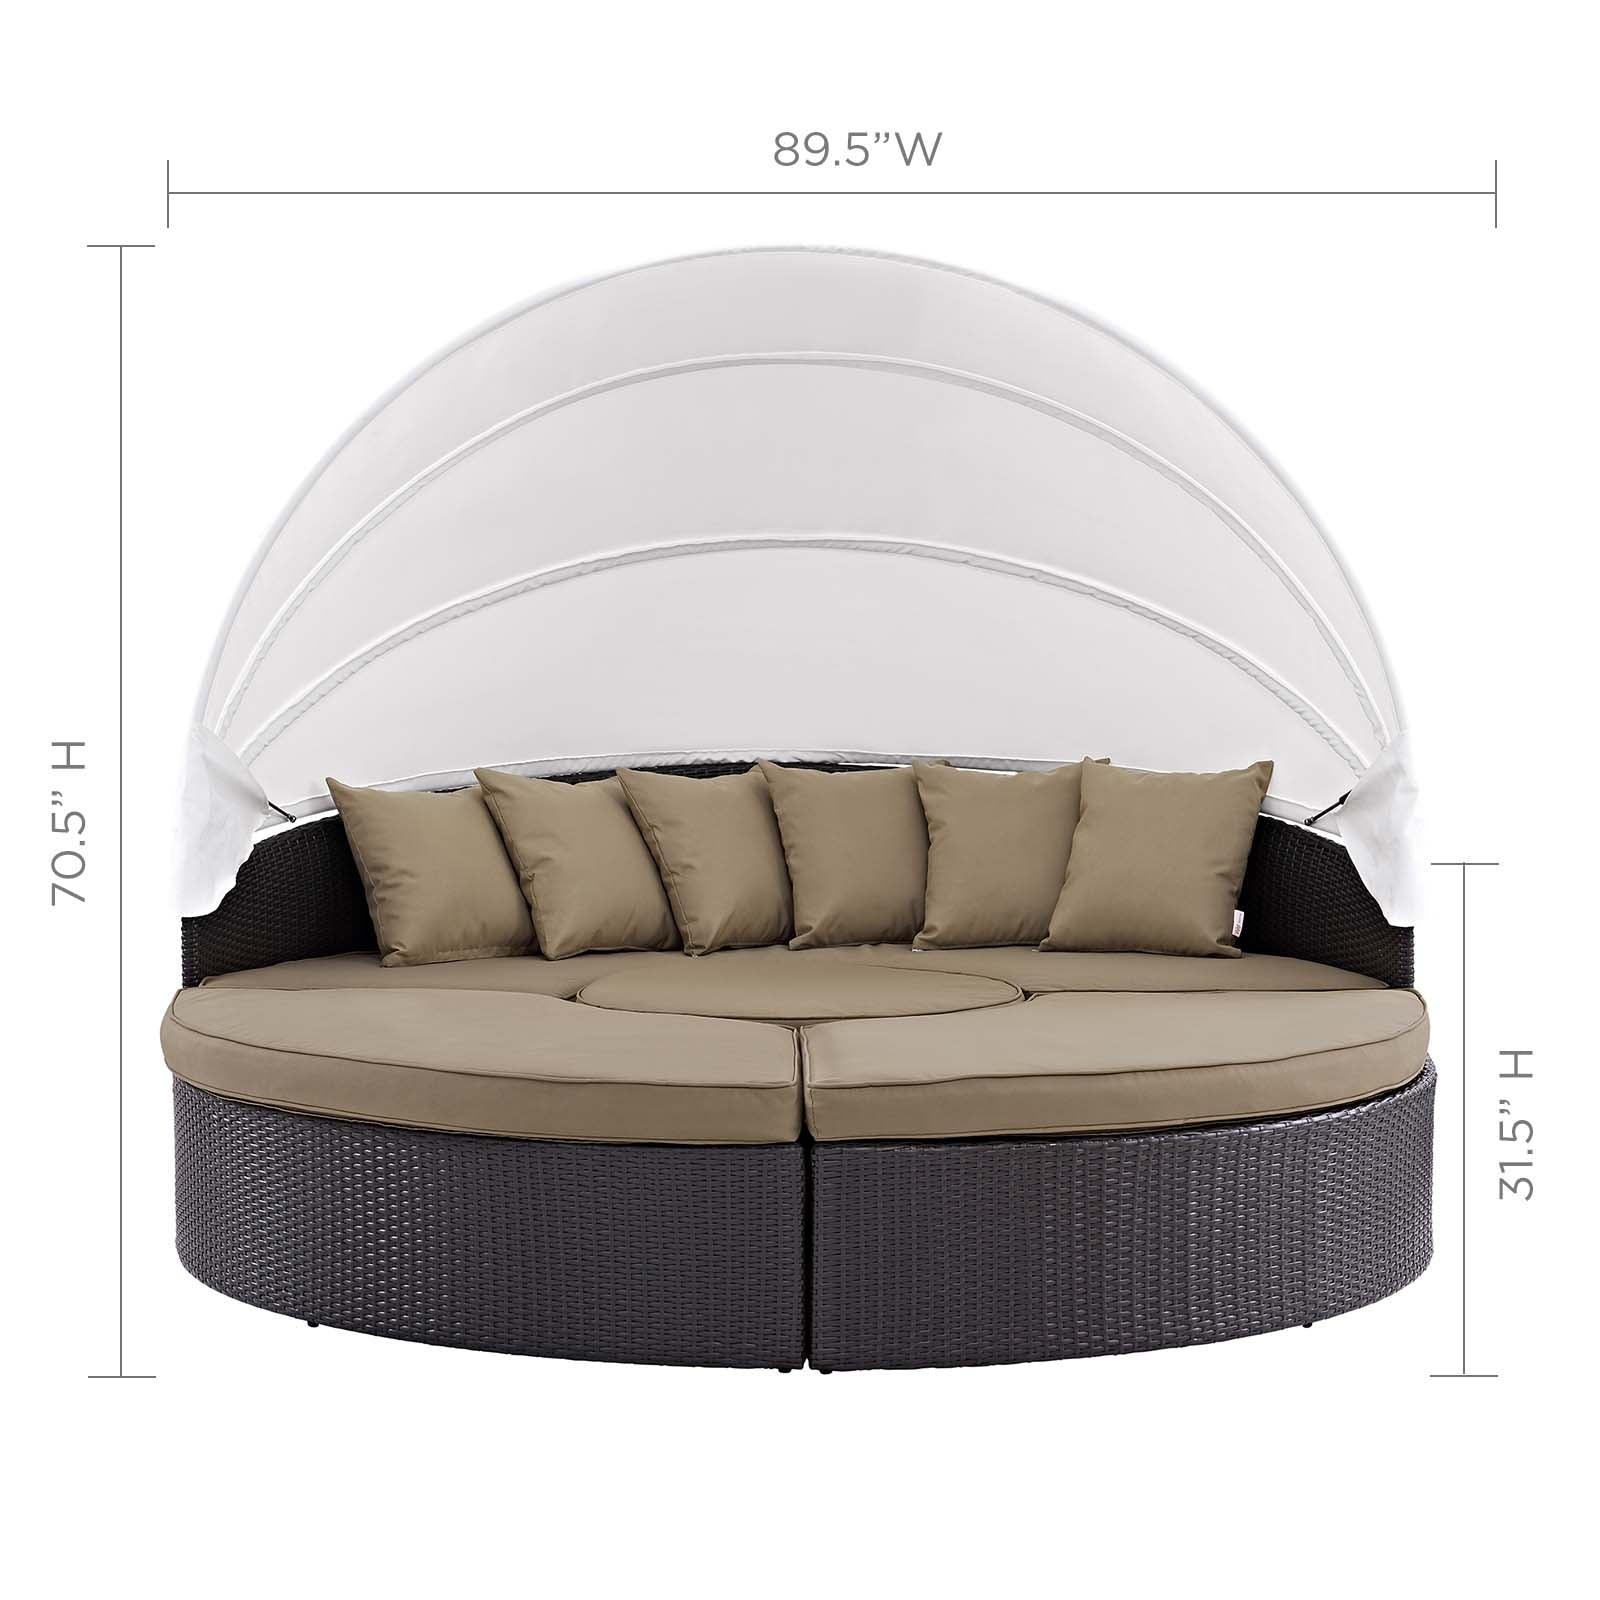 Modway Quest Canopy Outdoor Patio Daybed FredCo